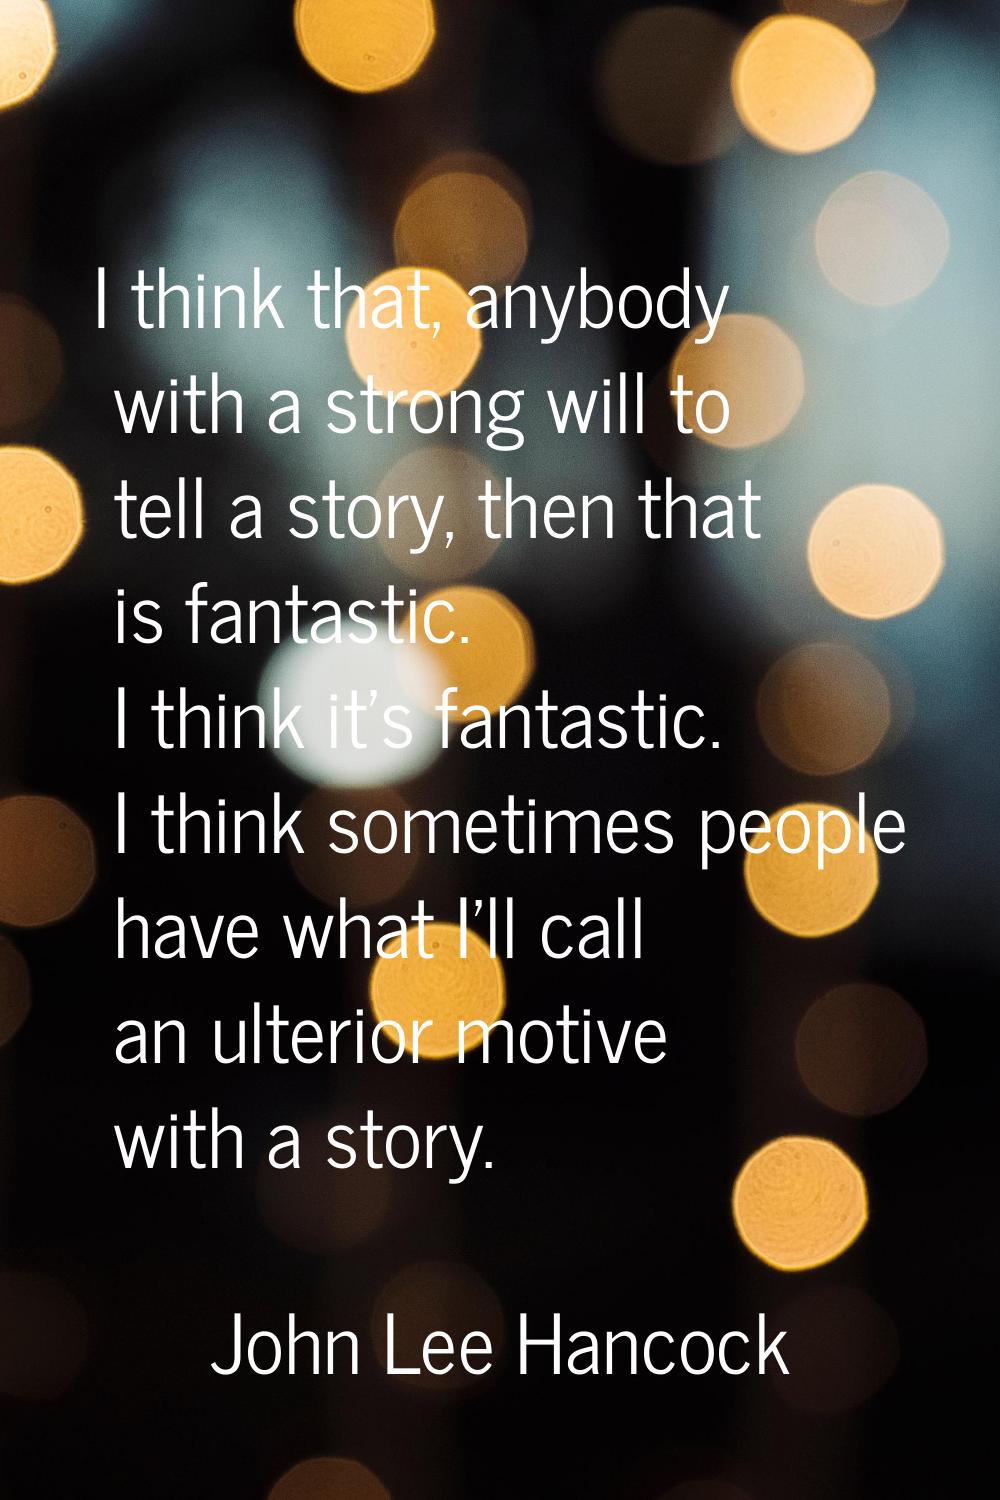 I think that, anybody with a strong will to tell a story, then that is fantastic. I think it's fant